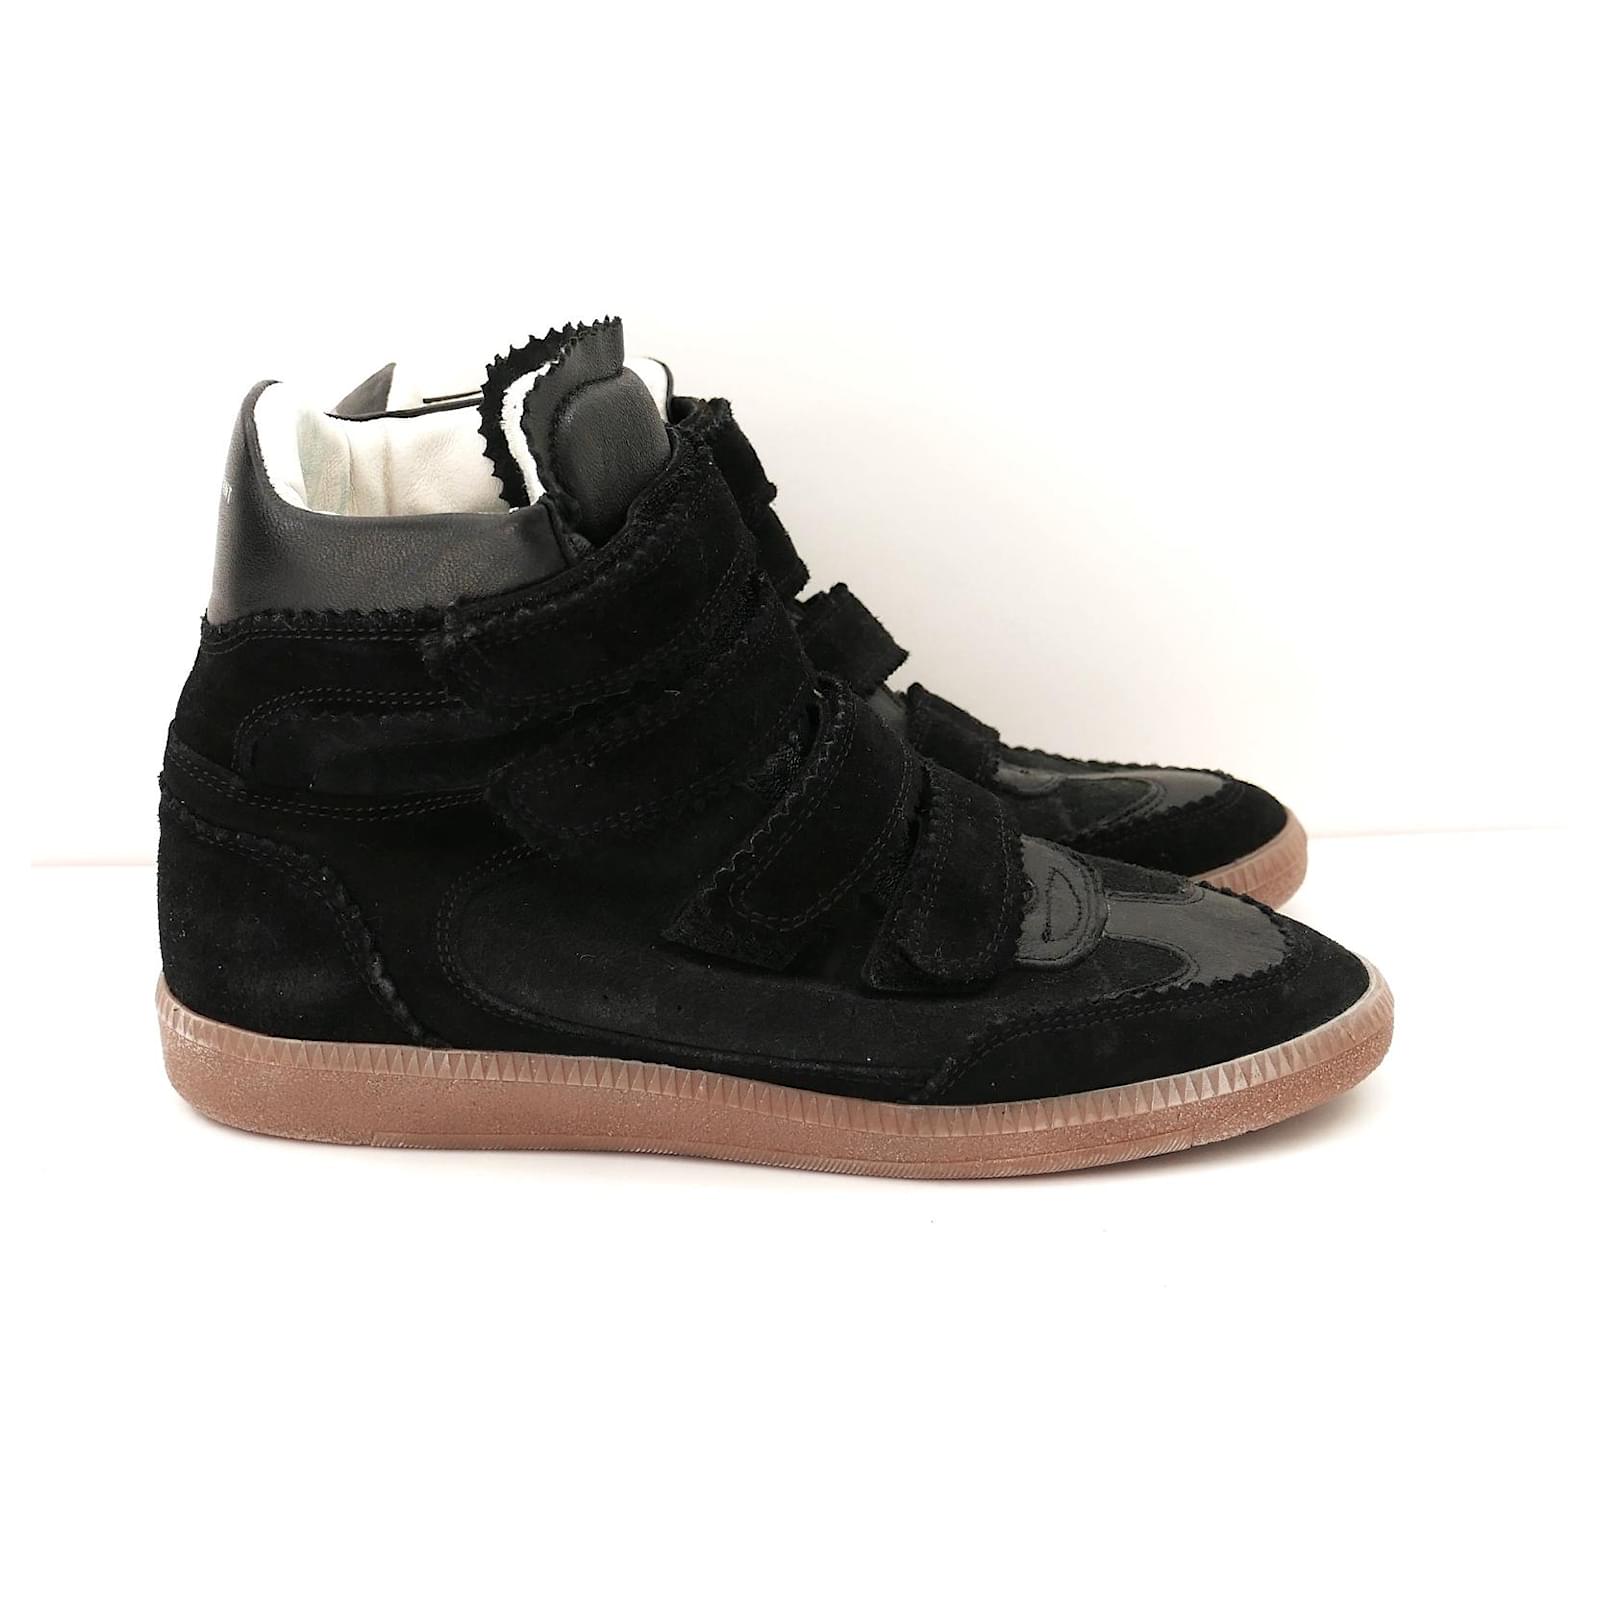 Aggregate 57+ isabel marant bilsy sneakers best